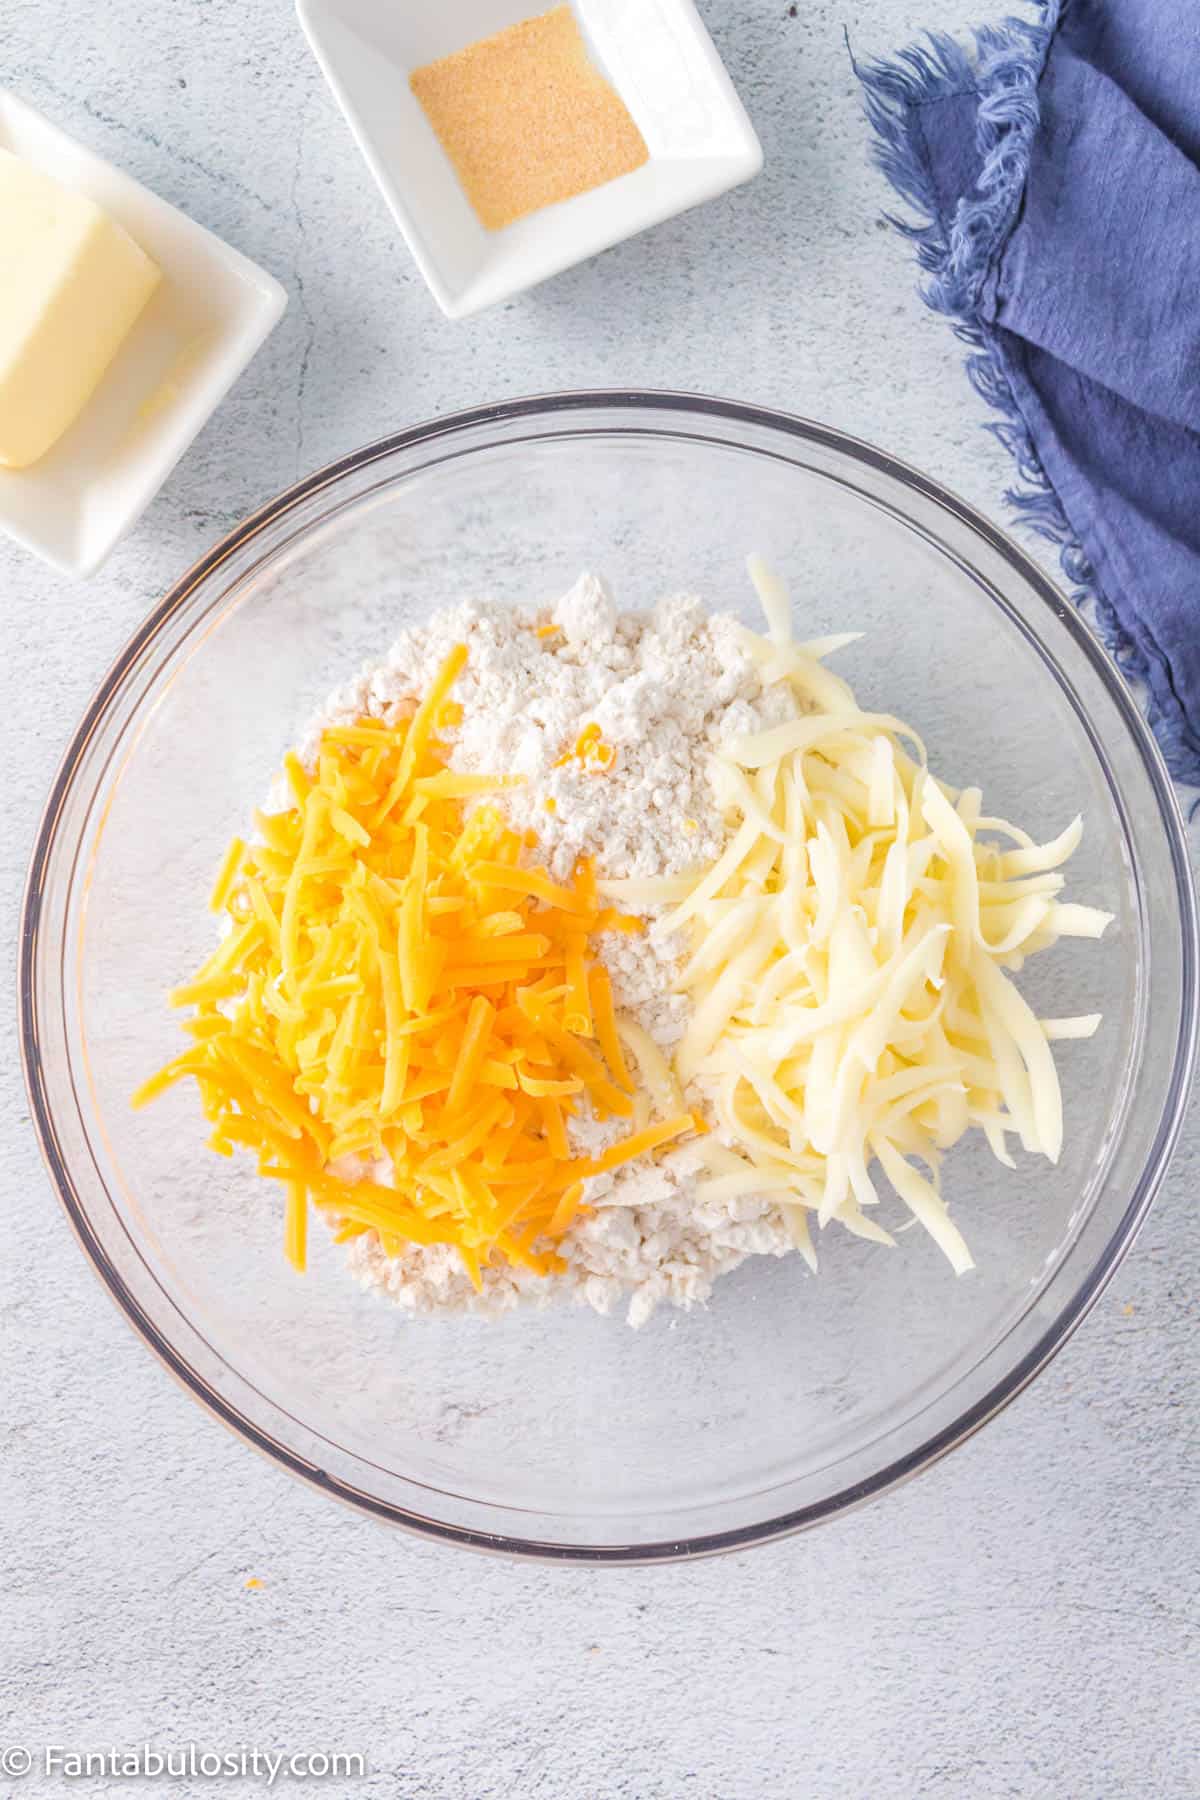 Bisquick mix, shredded cheddar cheese, and shredded mozarella cheese in a glass bowl.